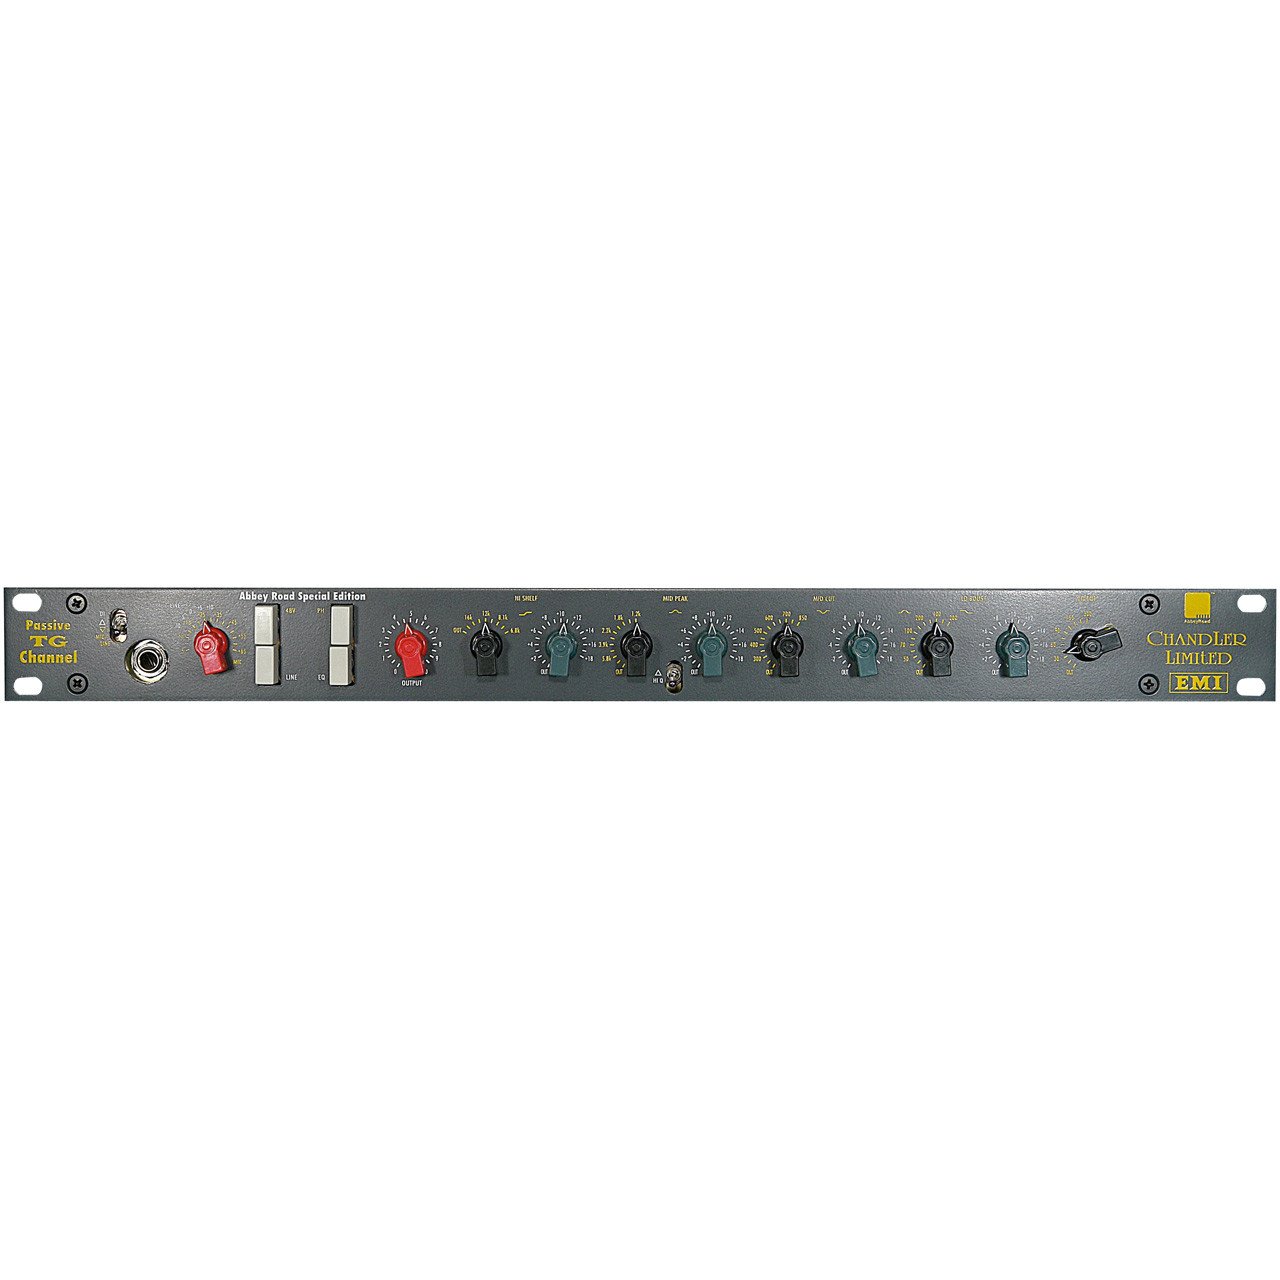 Preamps/Channel Strips - Chandler Limited TG Channel MKII